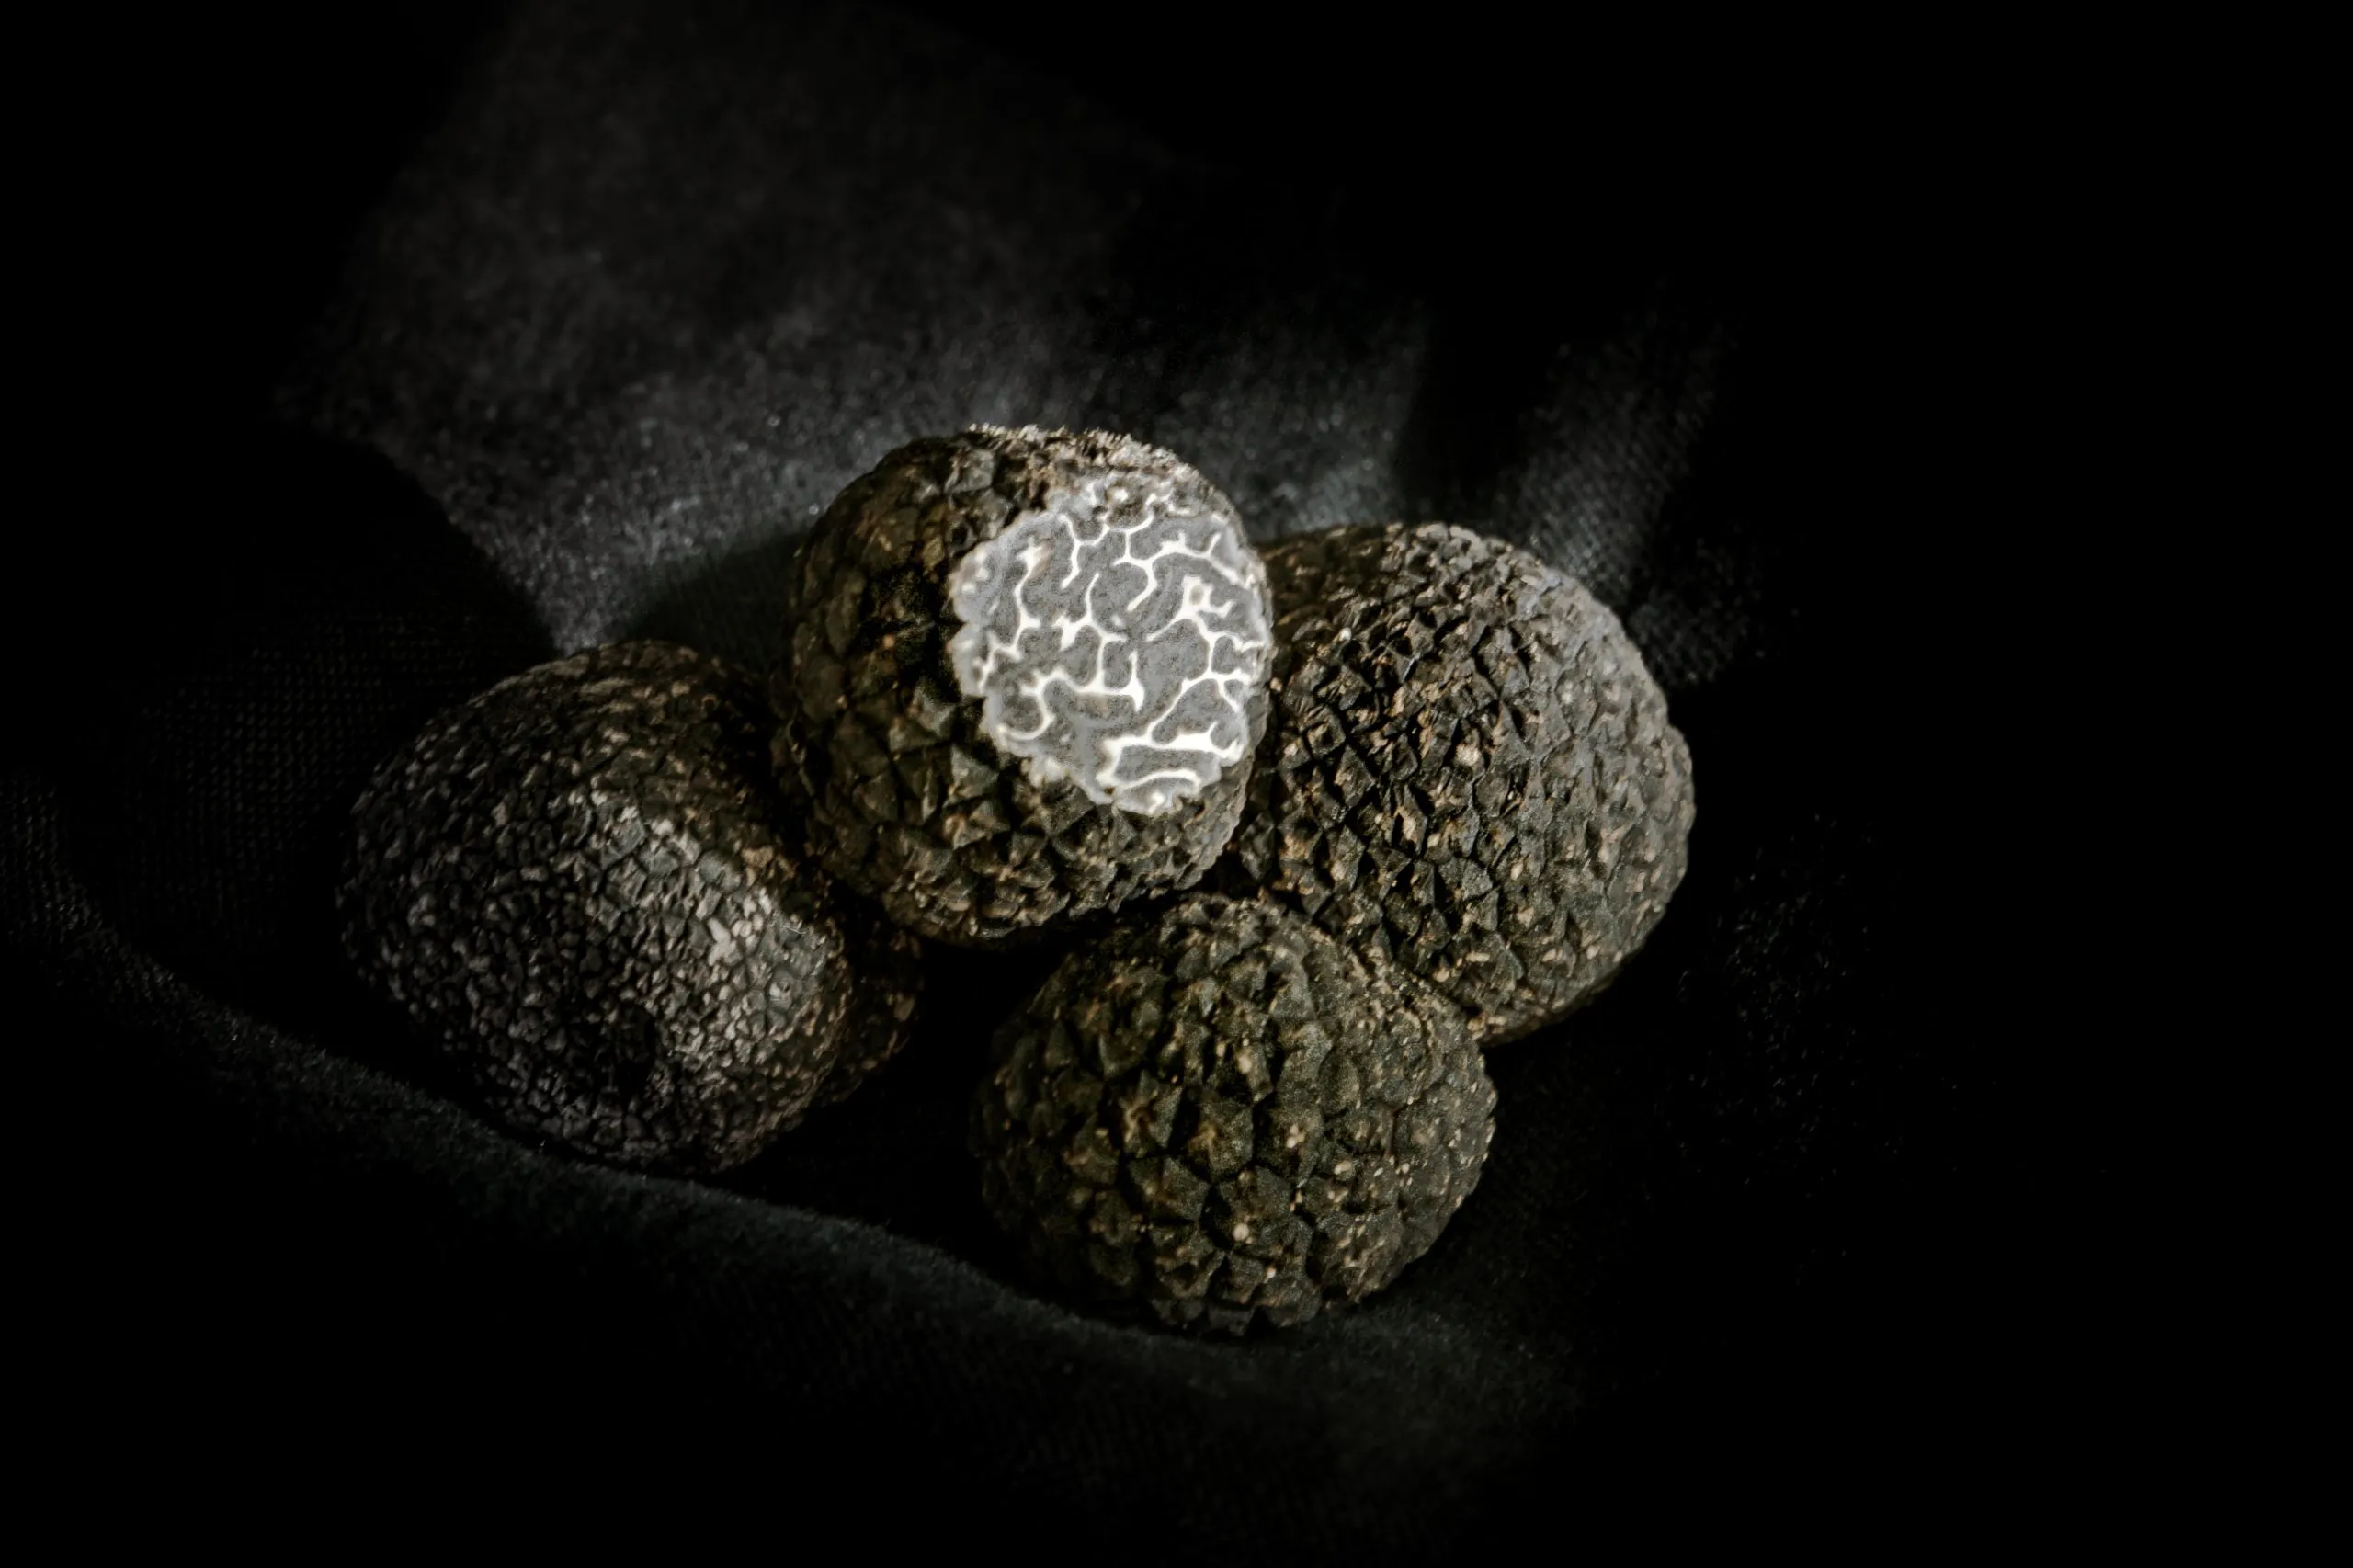 Superb Well being Benefits Of Truffle